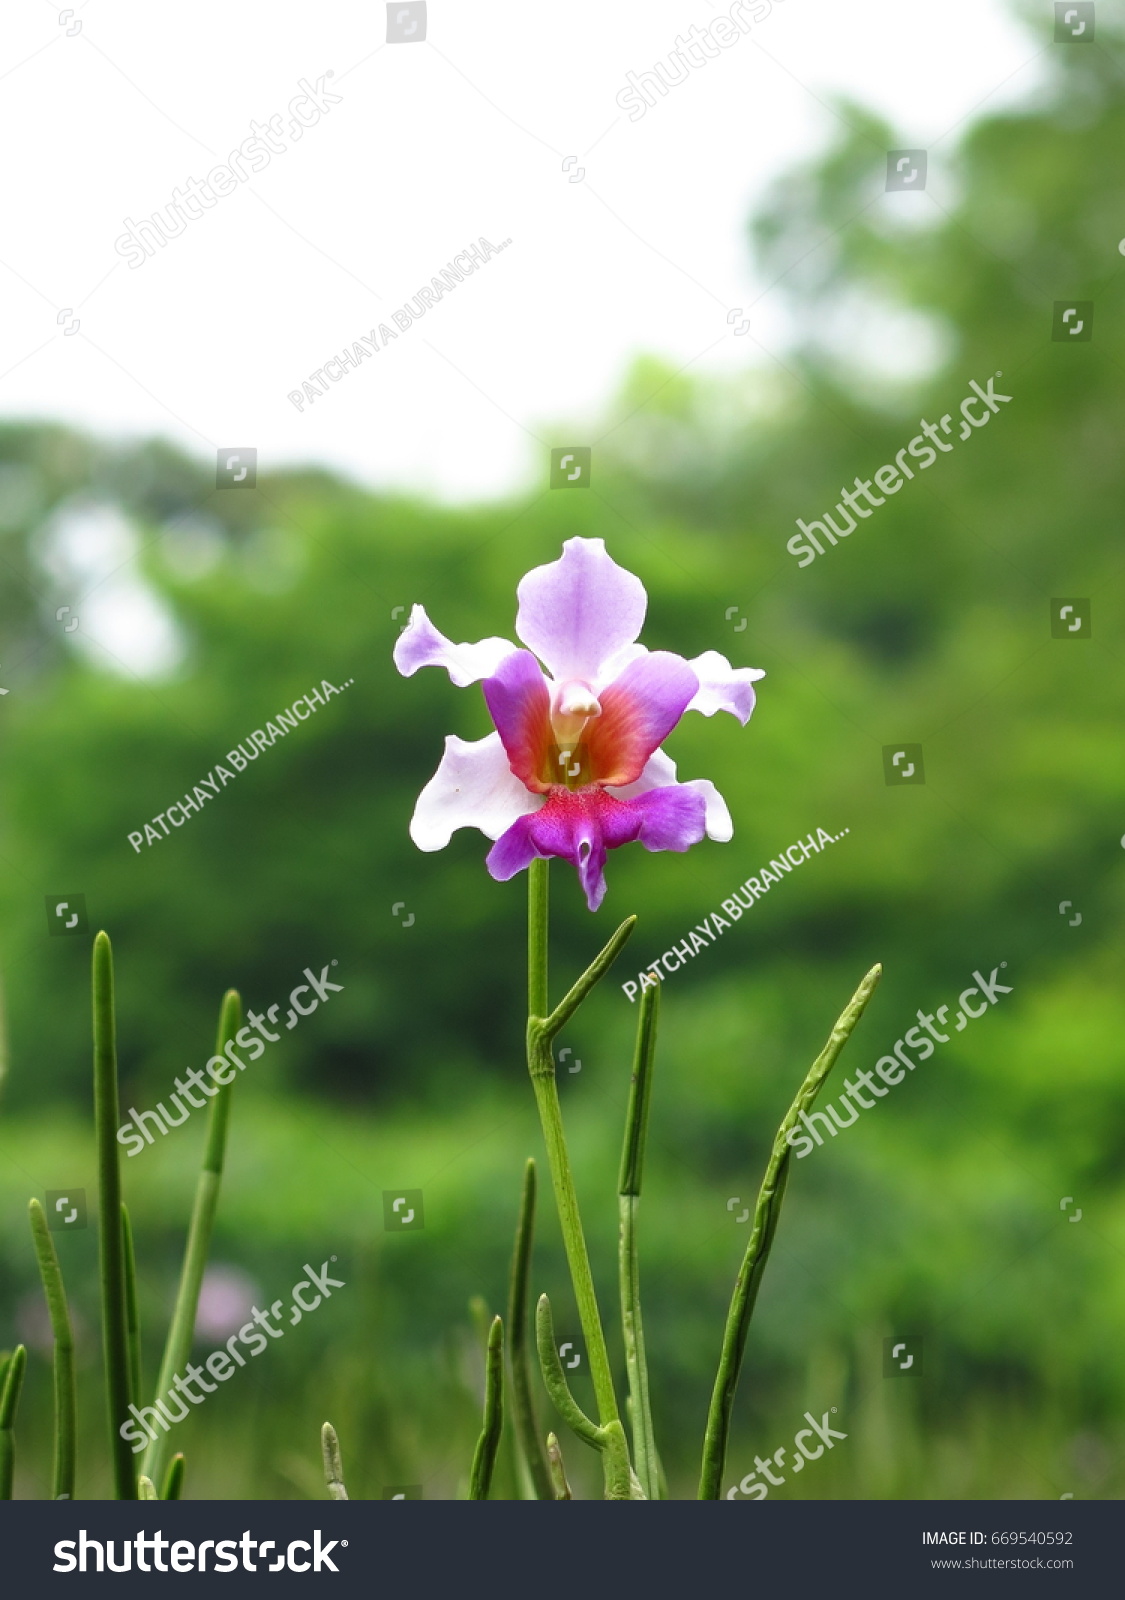 National flower of singapore